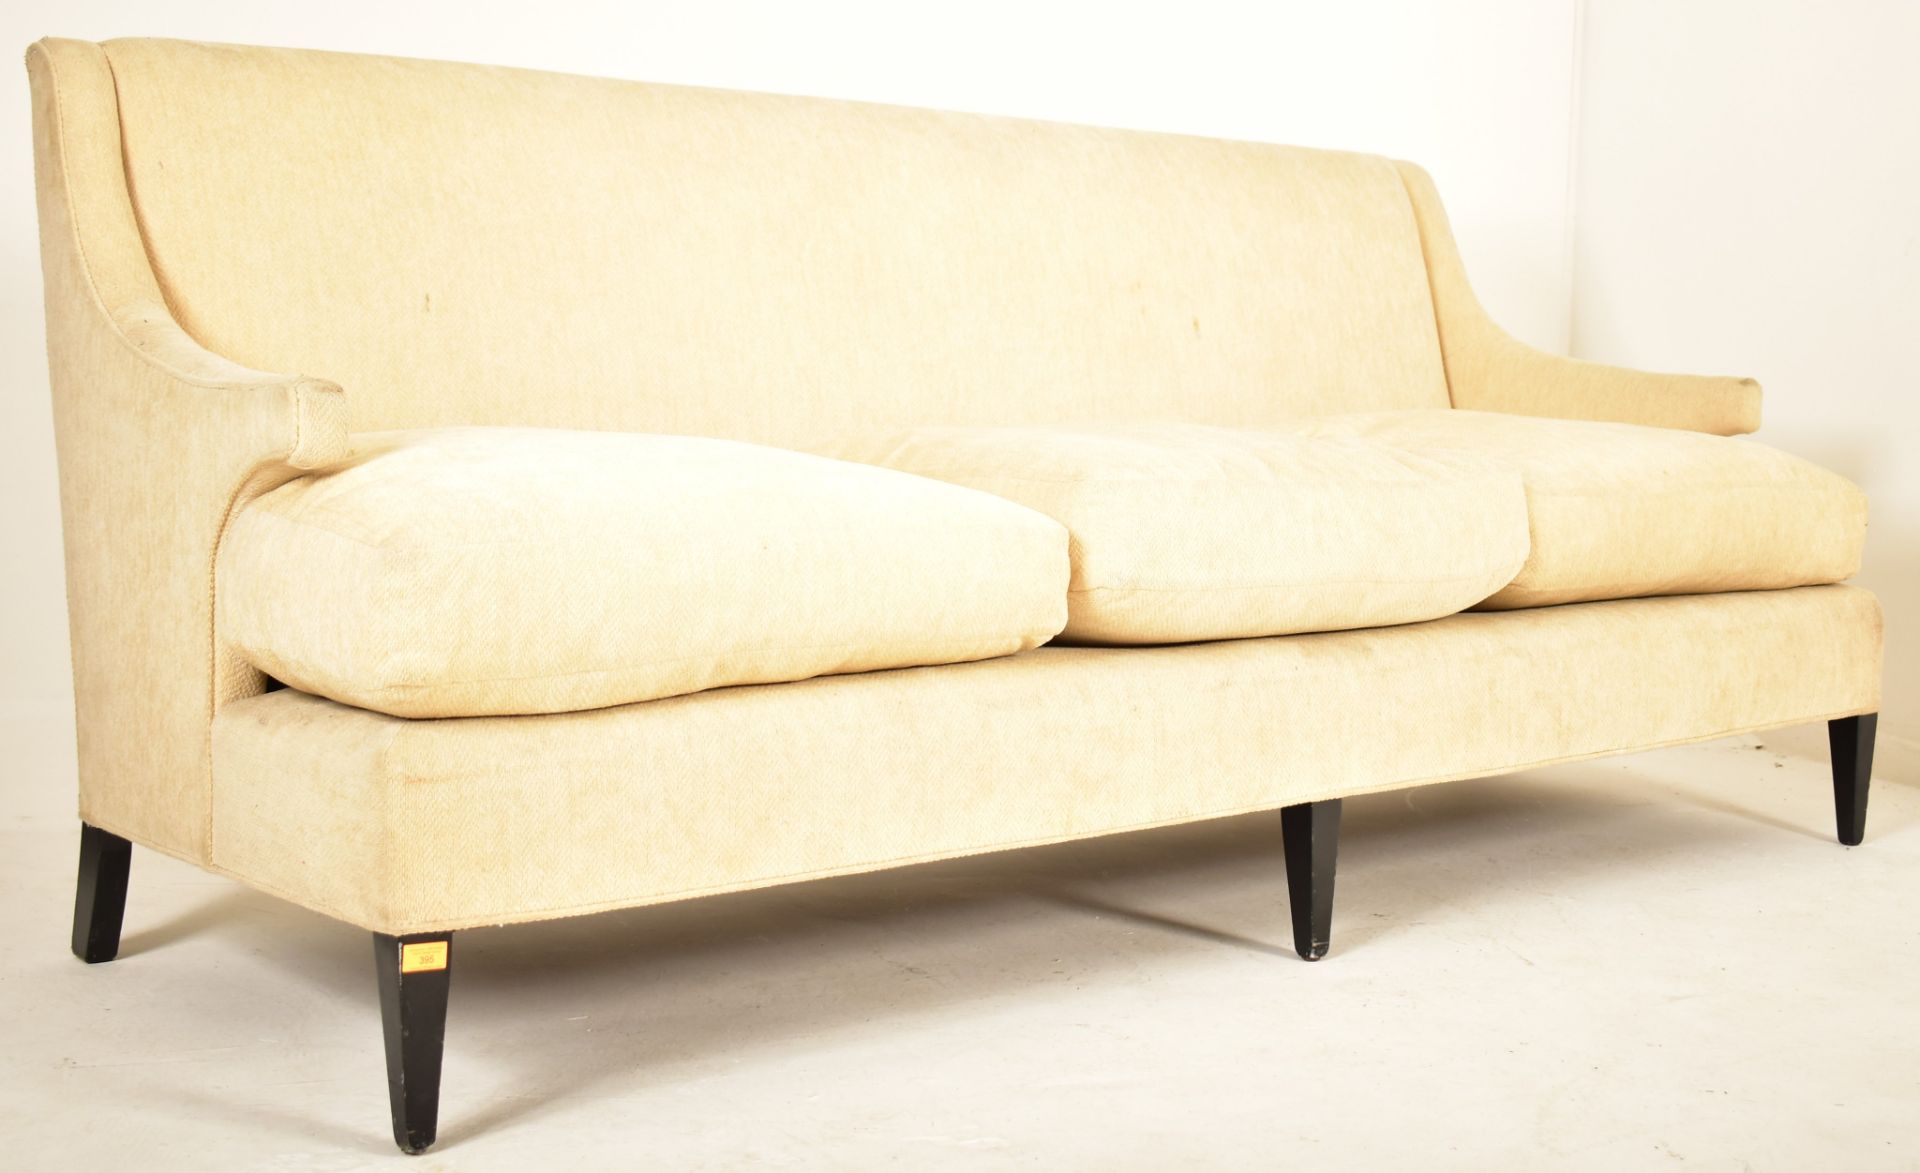 LARGE 20TH CENTURY SOFA IN THE MANNER OF GEORGE SMITH